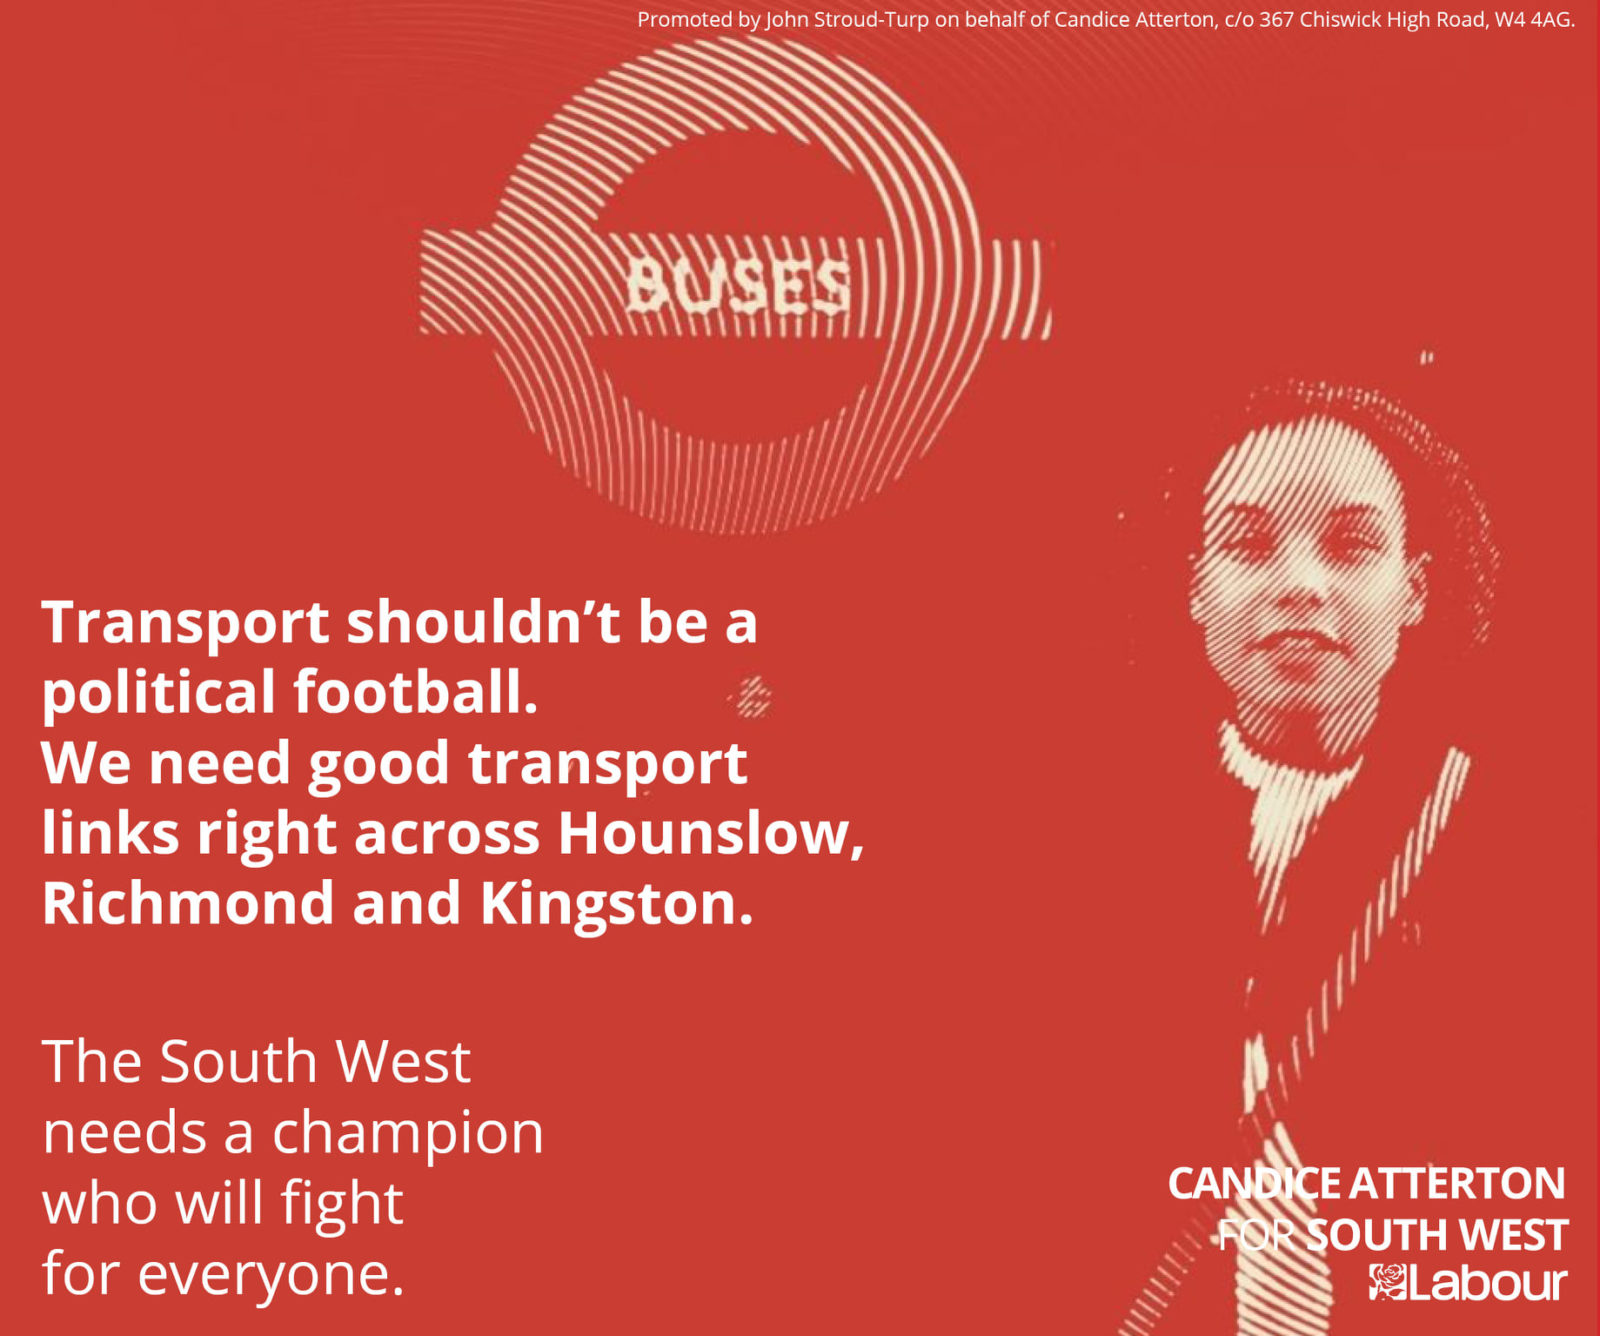 Transport is a vital public service and shouldn’t be used as a political football. Mayor of London Sadiq Khan has seen off the Conservative government